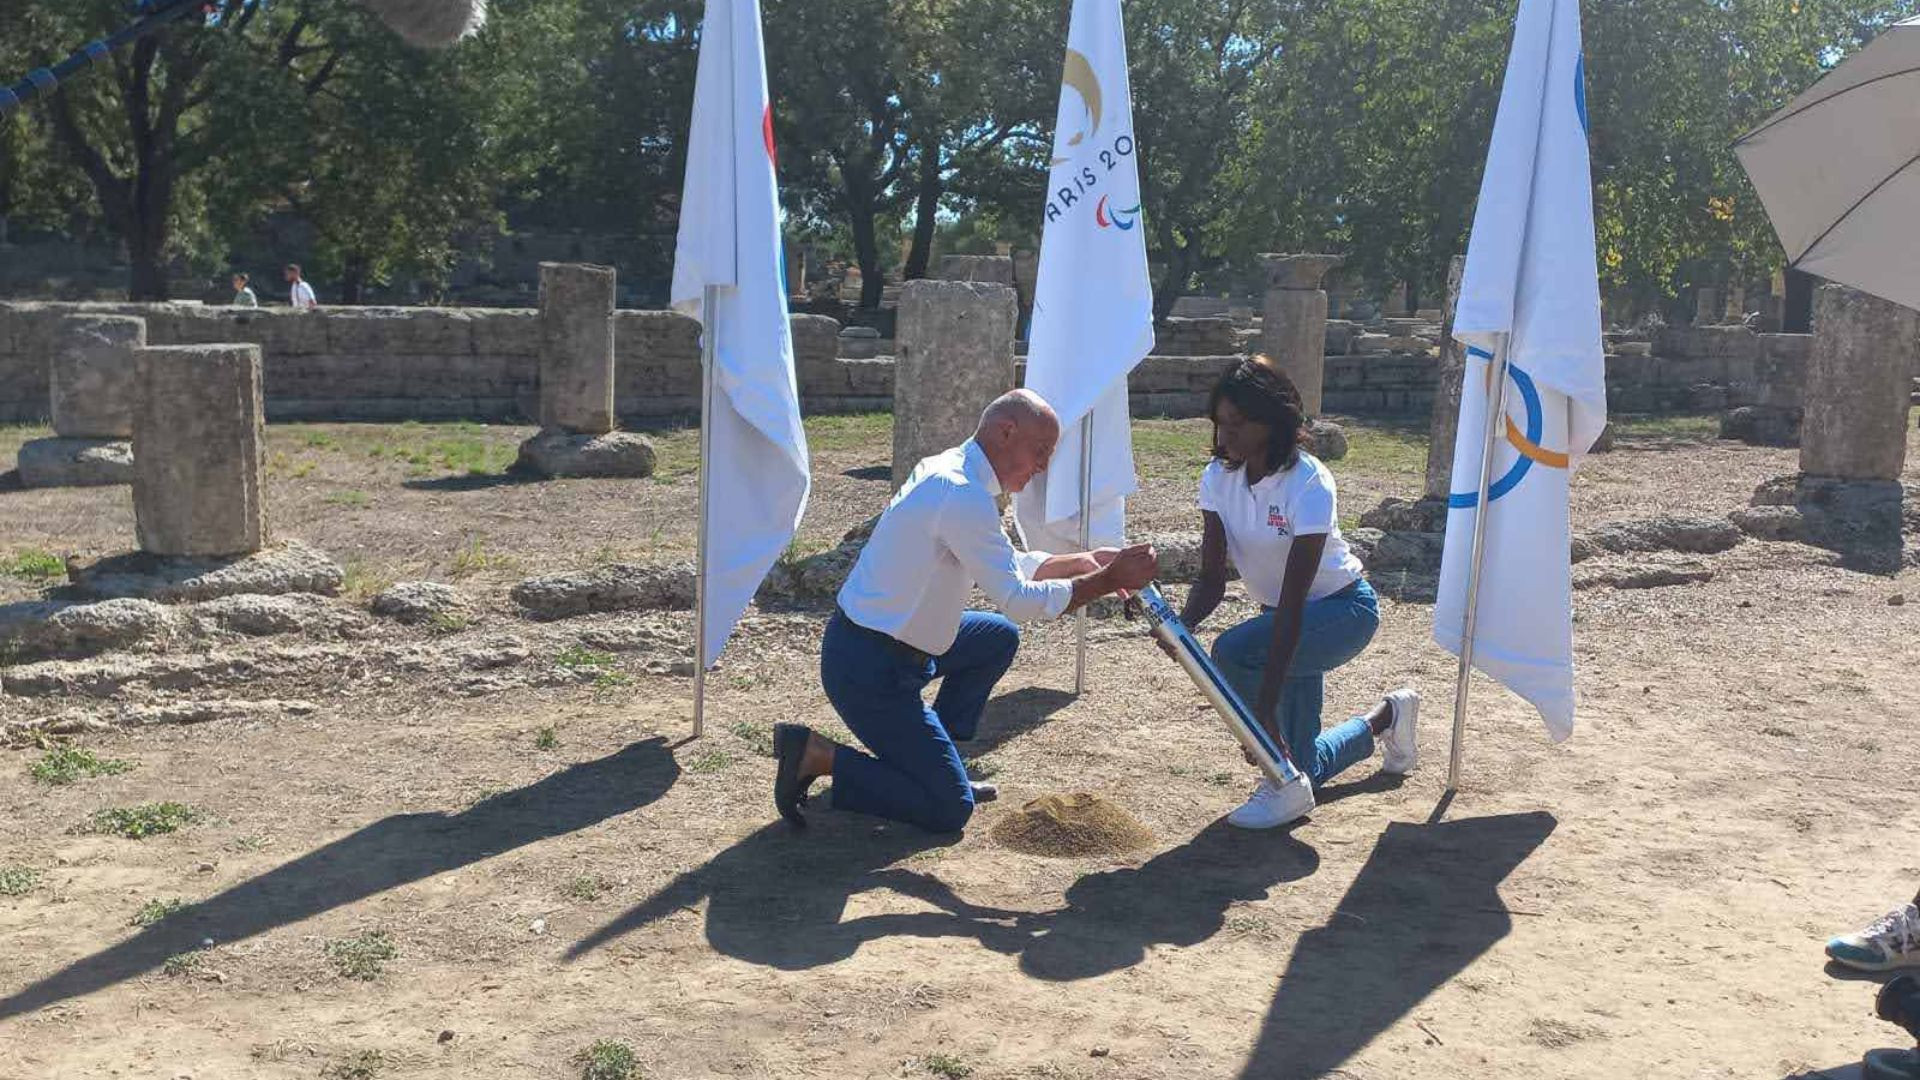 Paris 2024 receives "sacred soil" from Ancient Olympia